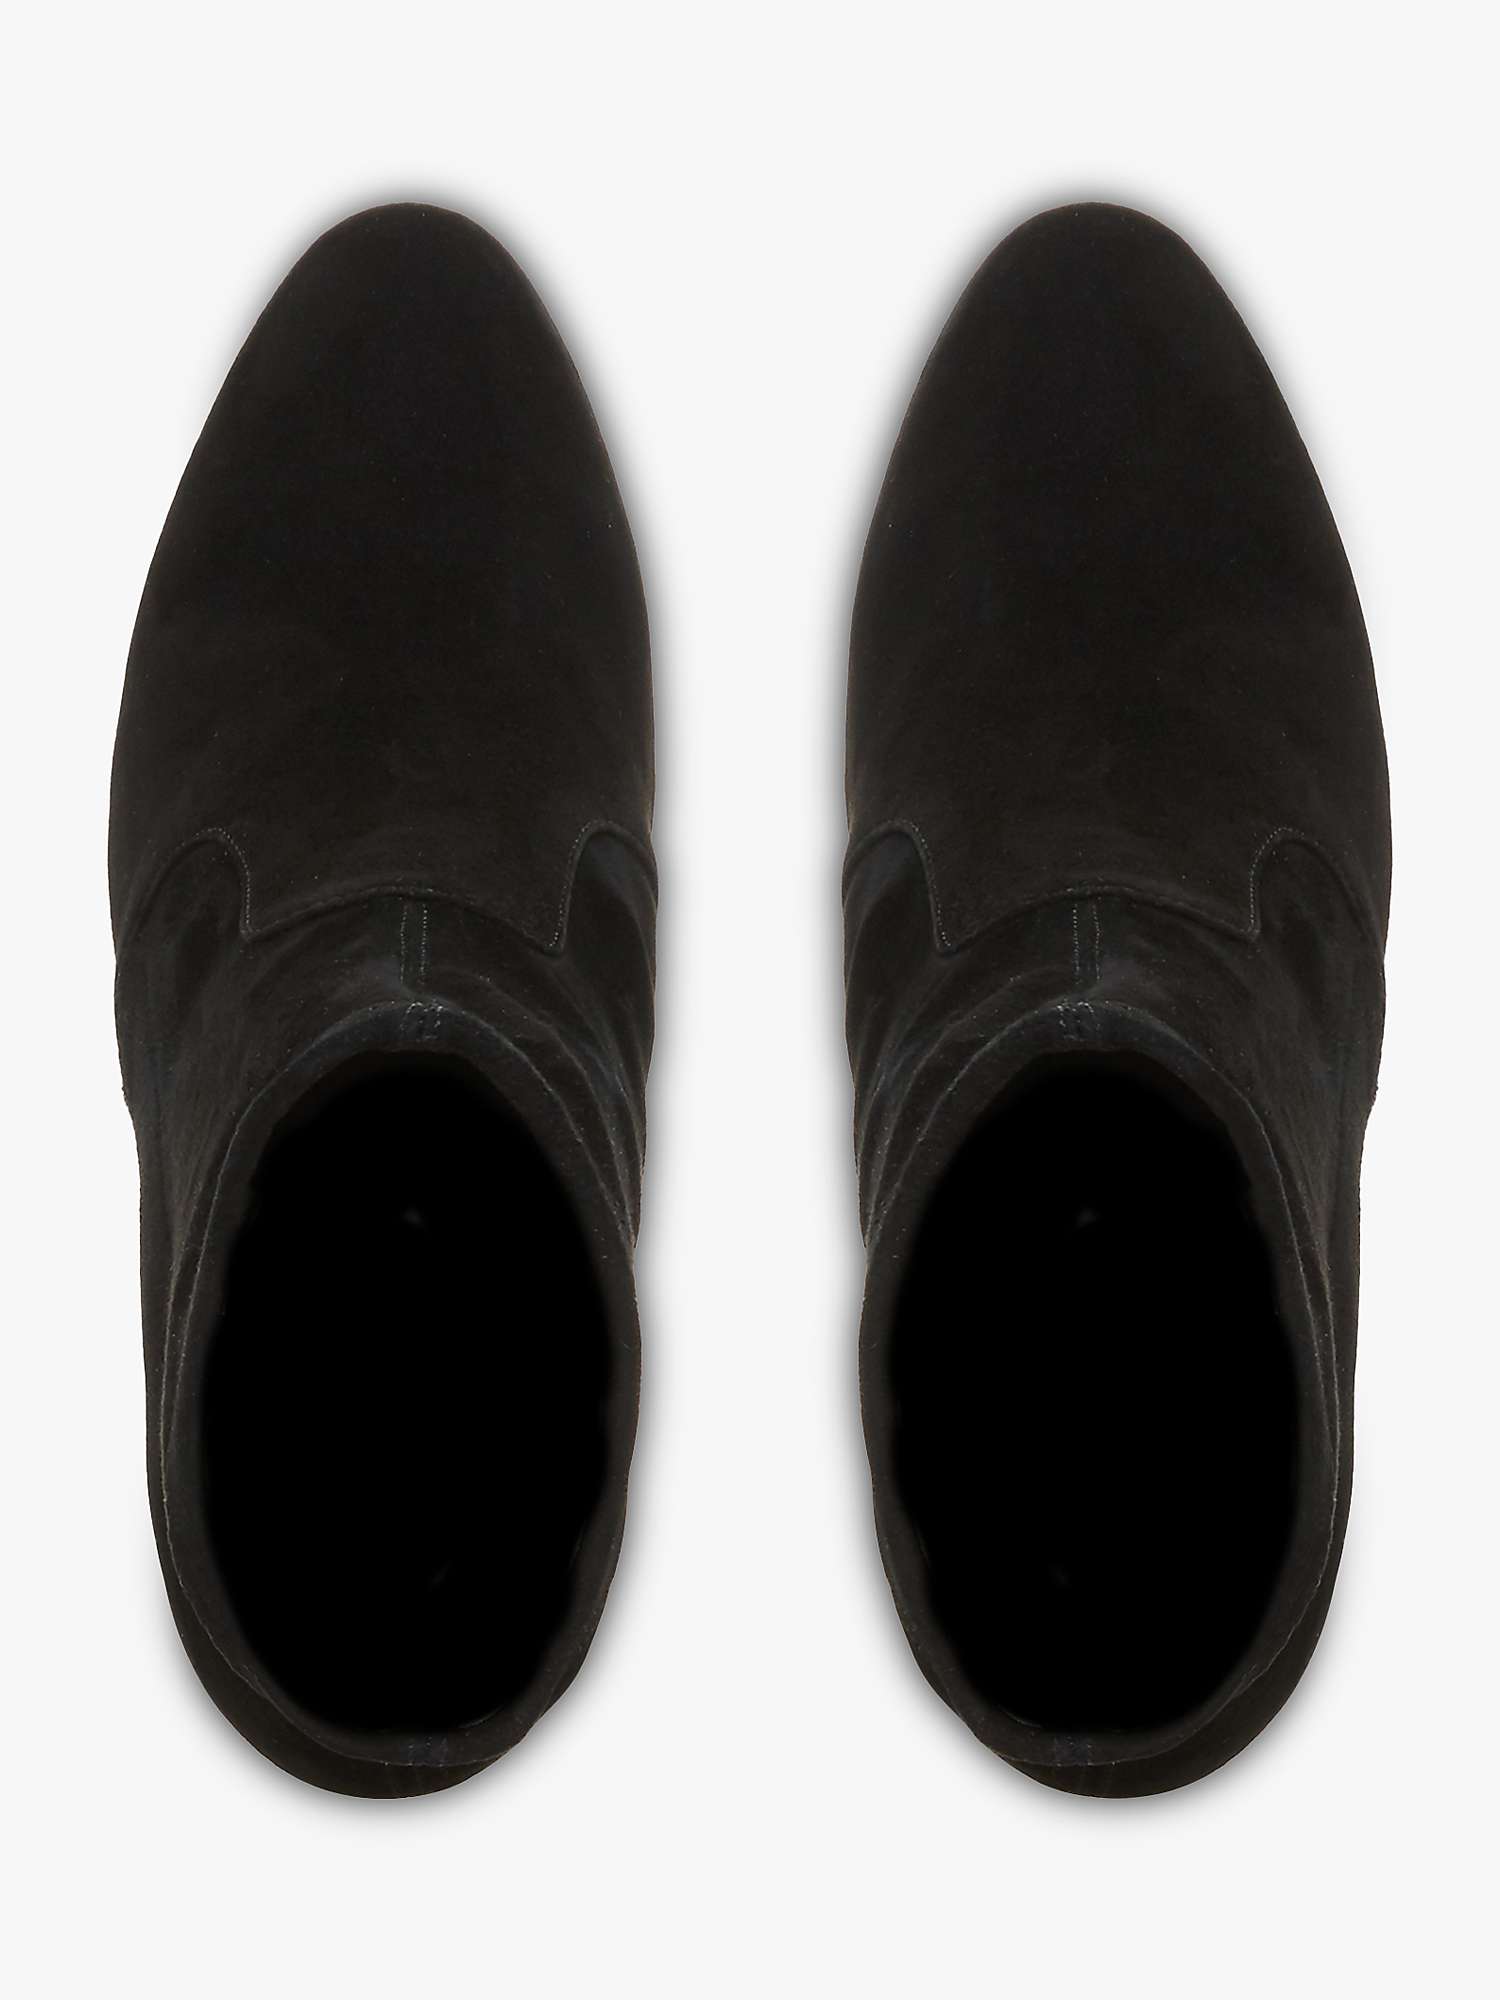 Buy Dune Optical Suede Ankle Boots, Black Online at johnlewis.com